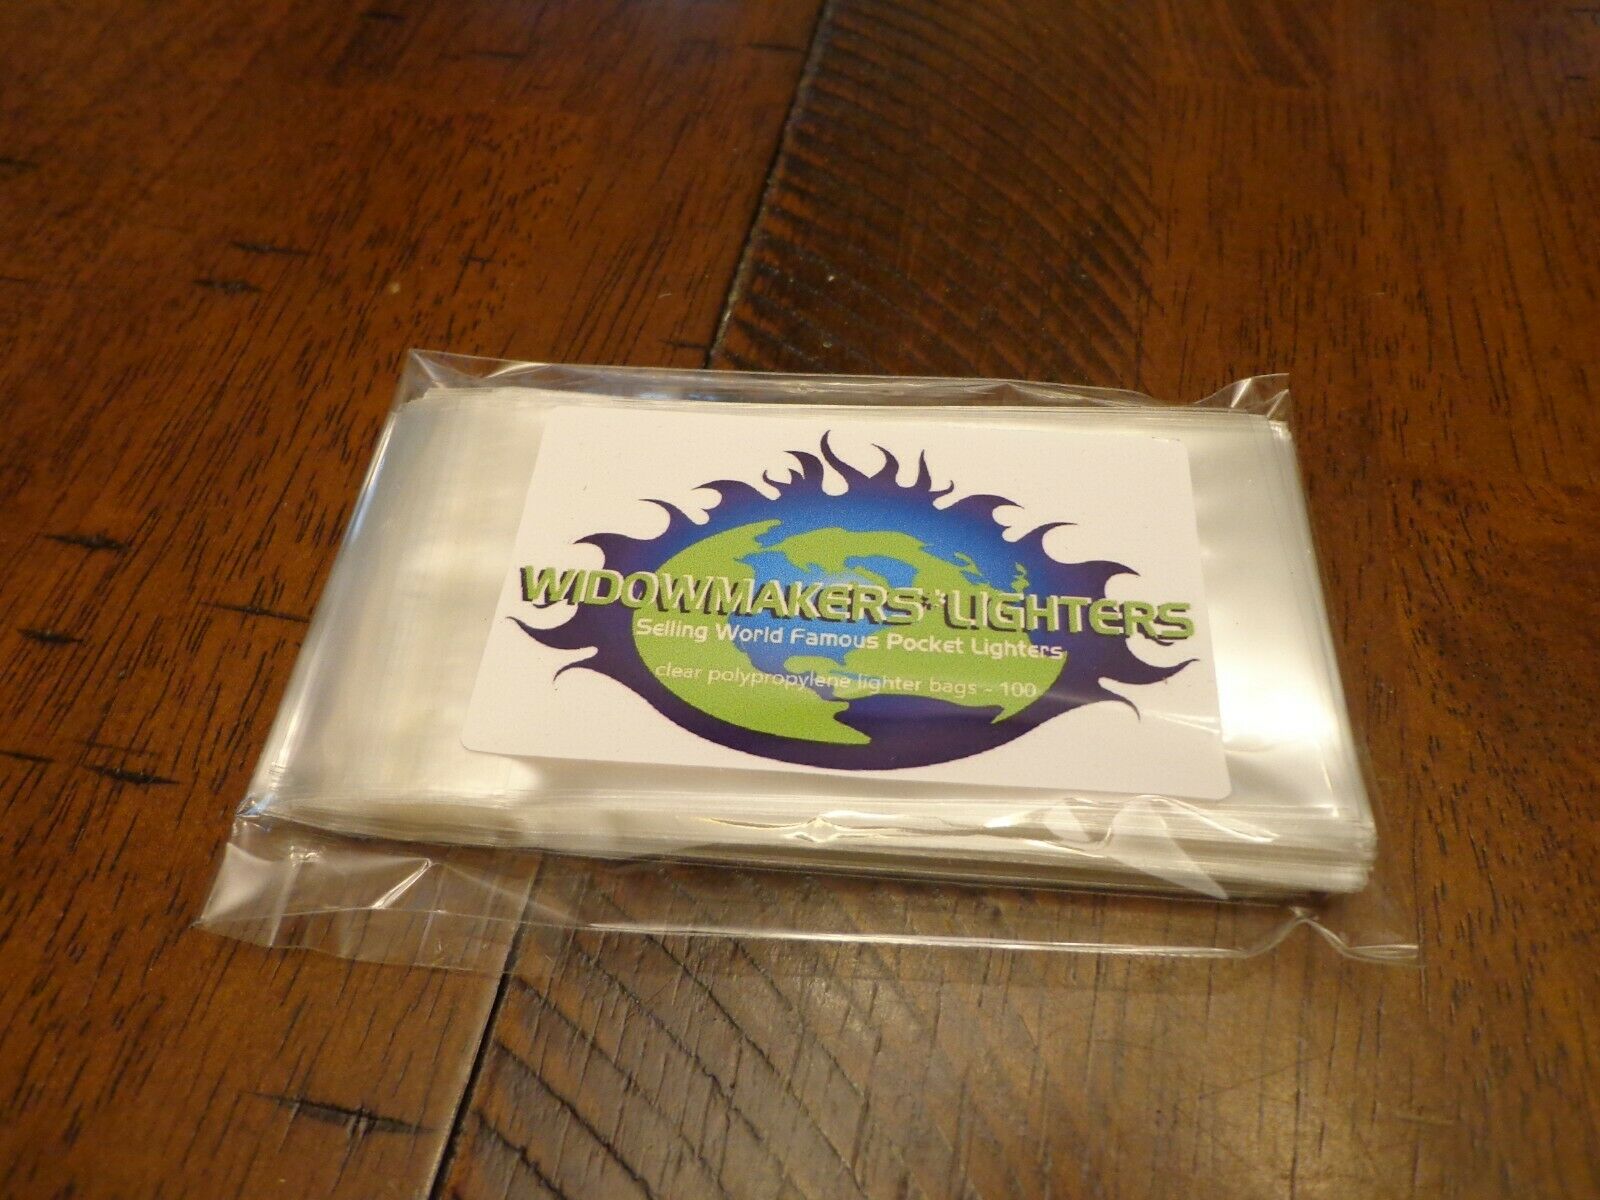 100 FULL SIZE LIGHTER STORAGE BAGS RESEALABLE PACK OF 100 BAGS WIDOWMAKER